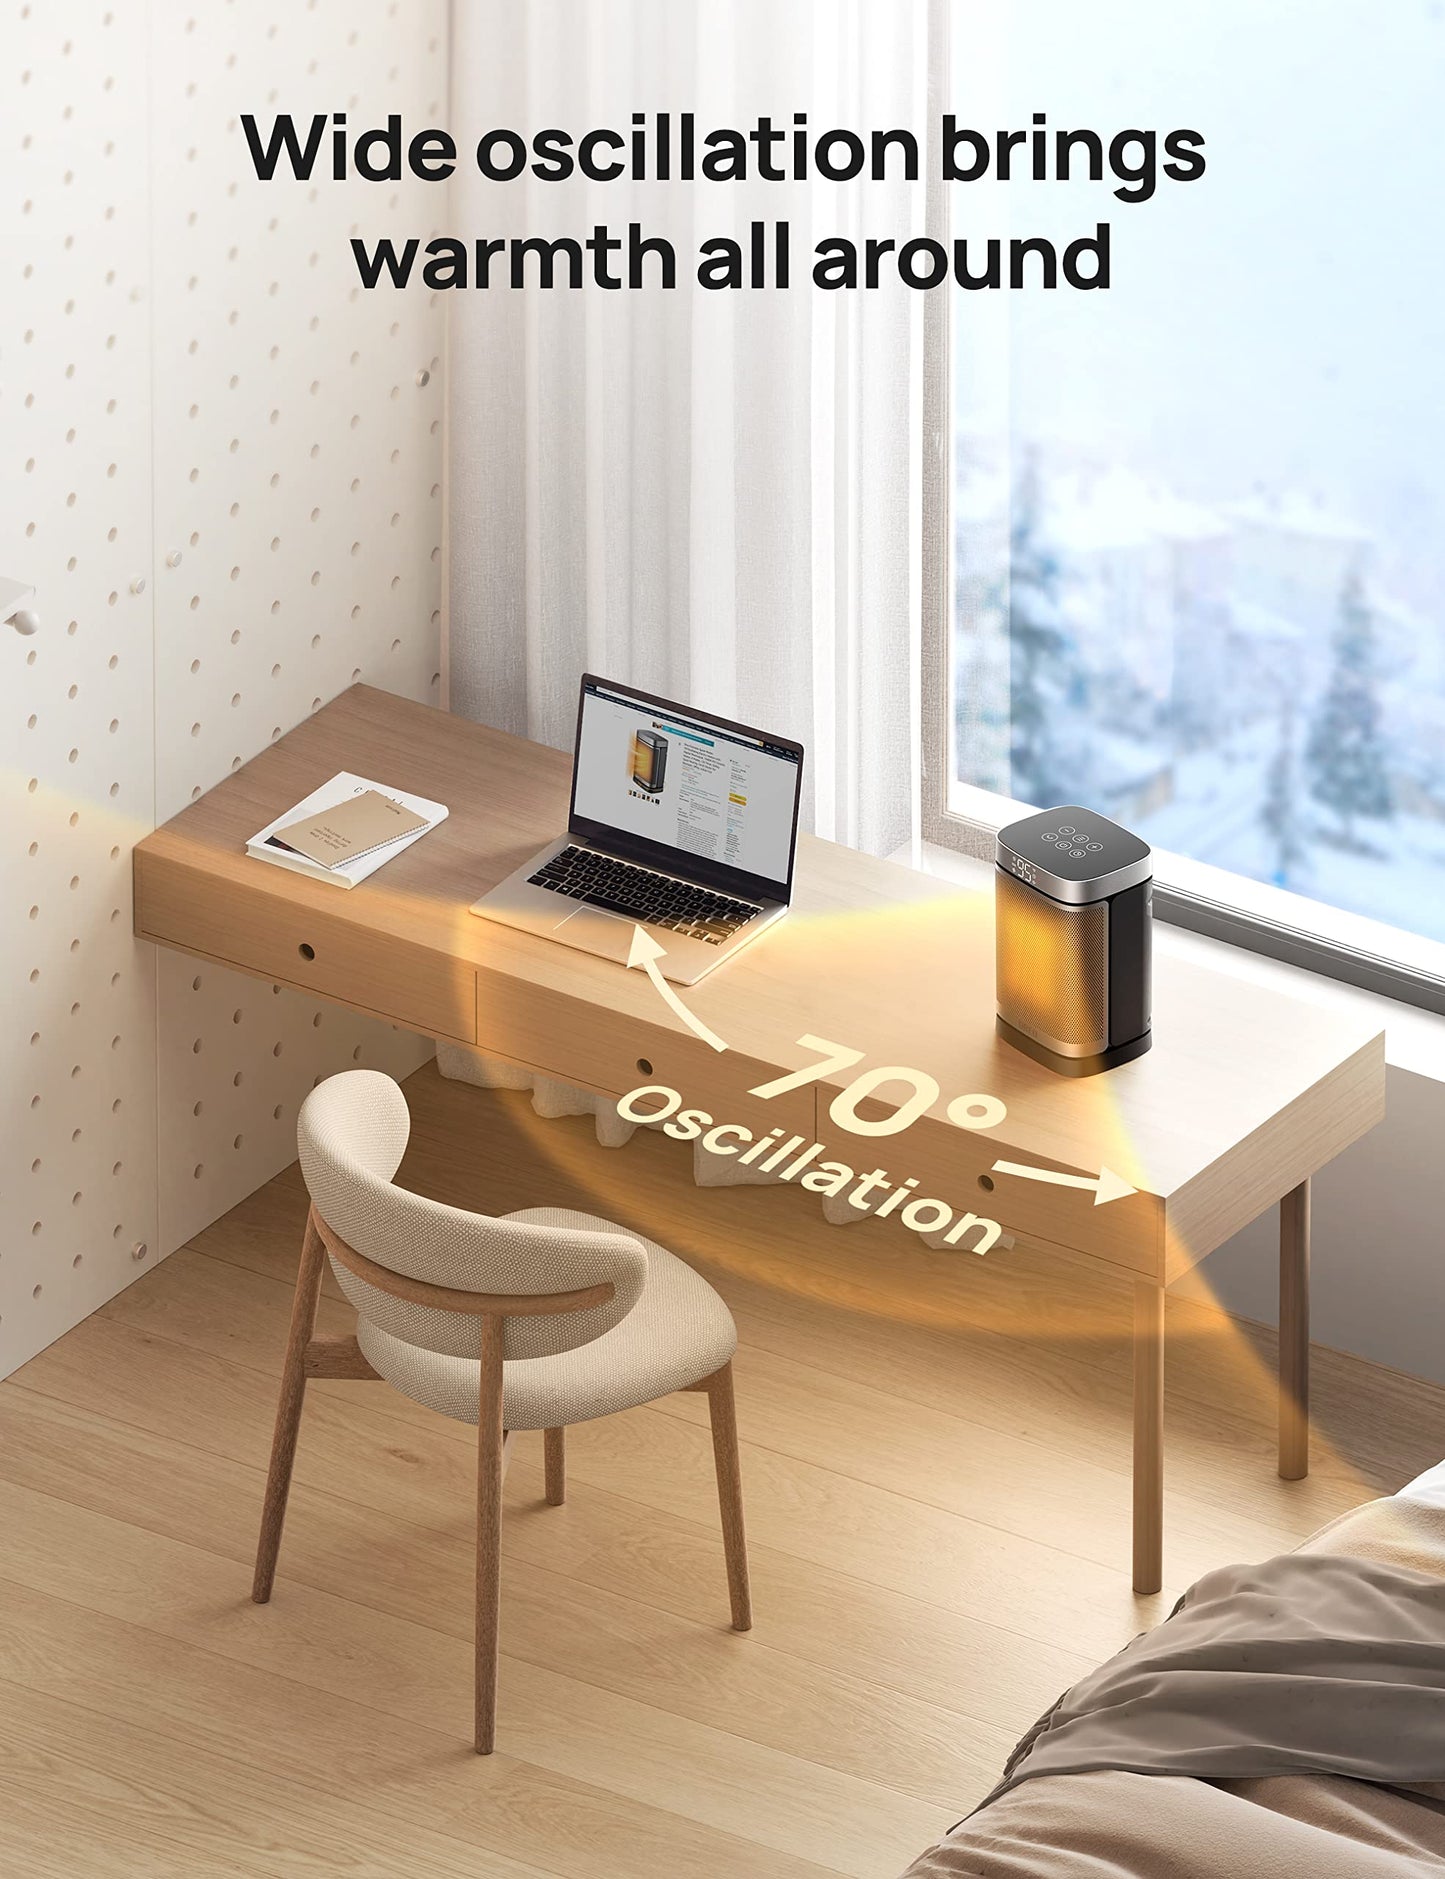 Dreo Space Heater Indoor, 1500W Portable Heaters with Remote, PTC Ceramic Electric Heater for Bedroom with Thermostat, 70°Oscillation, Safety Toasty Heater, 12h Timer, Room Heater for Home Office